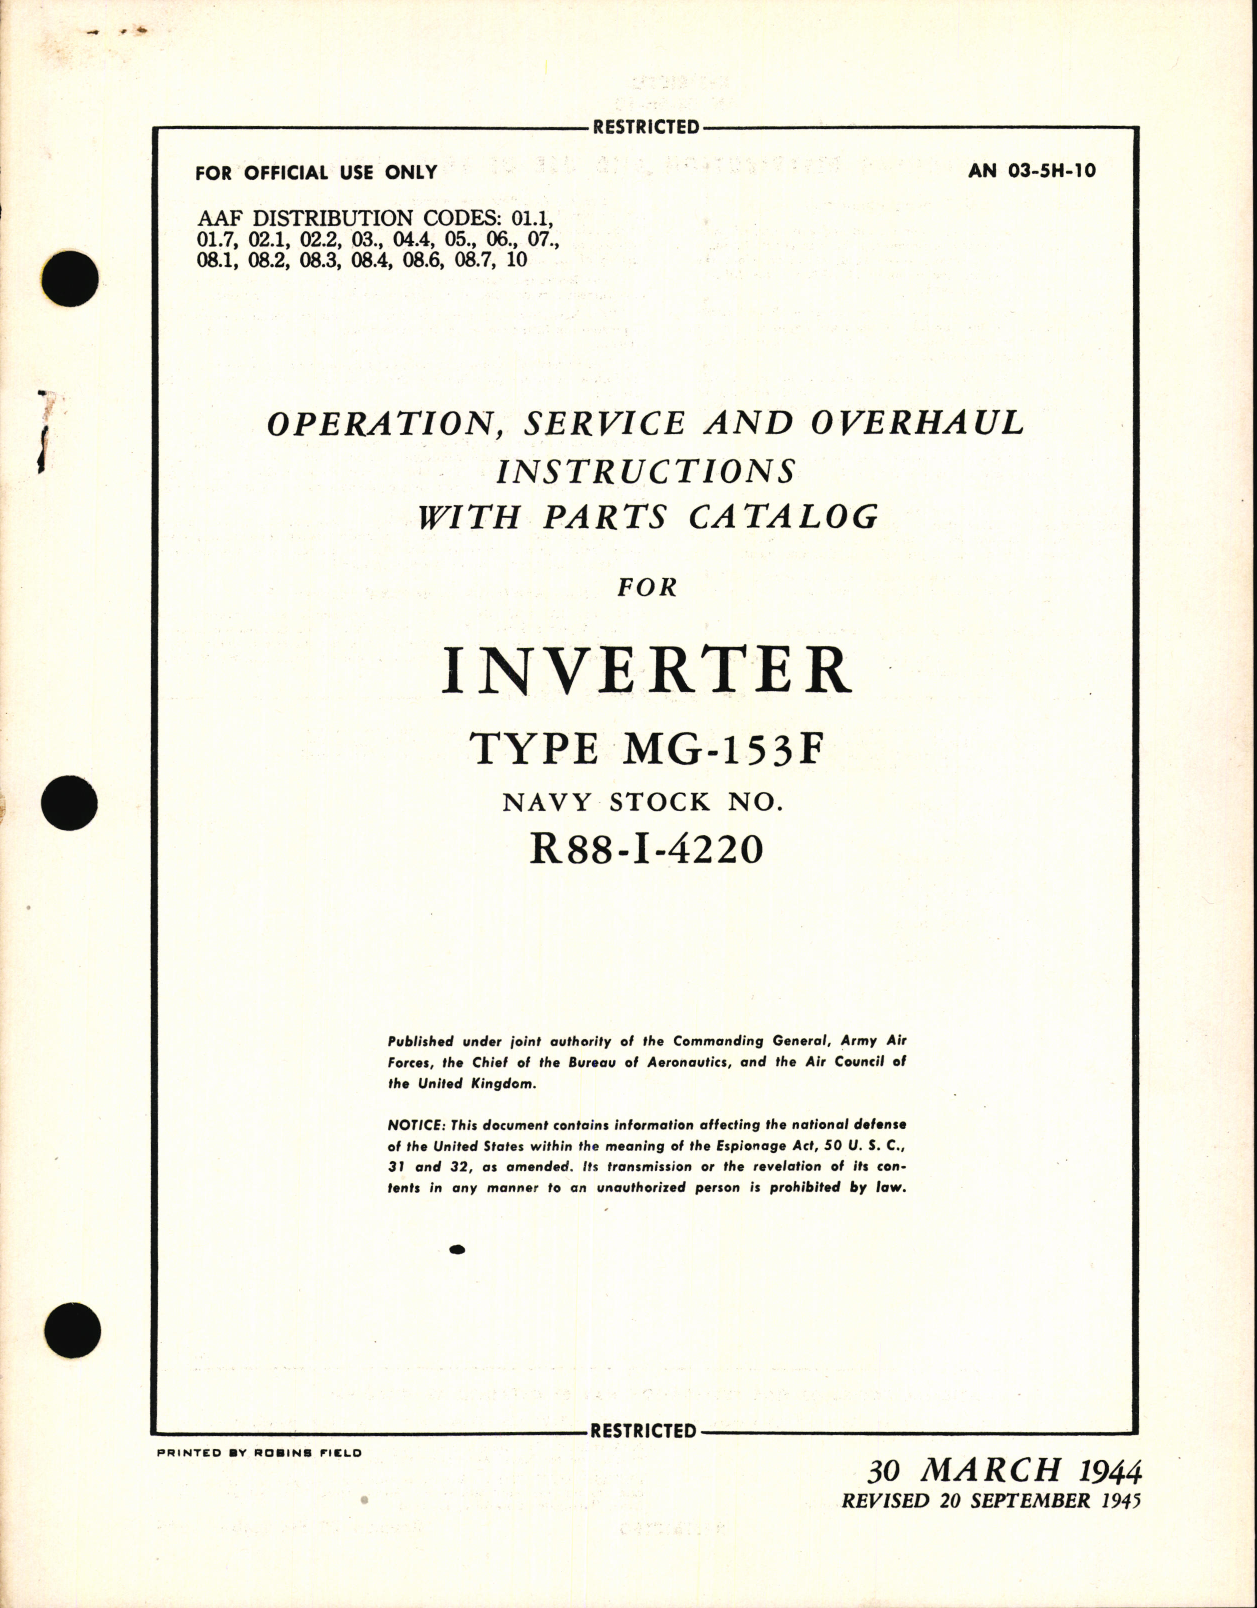 Sample page 1 from AirCorps Library document: Operation, Service & Overhaul Instructions with Parts Catalog for Inverter Type MG-153F (R88-I-4220)